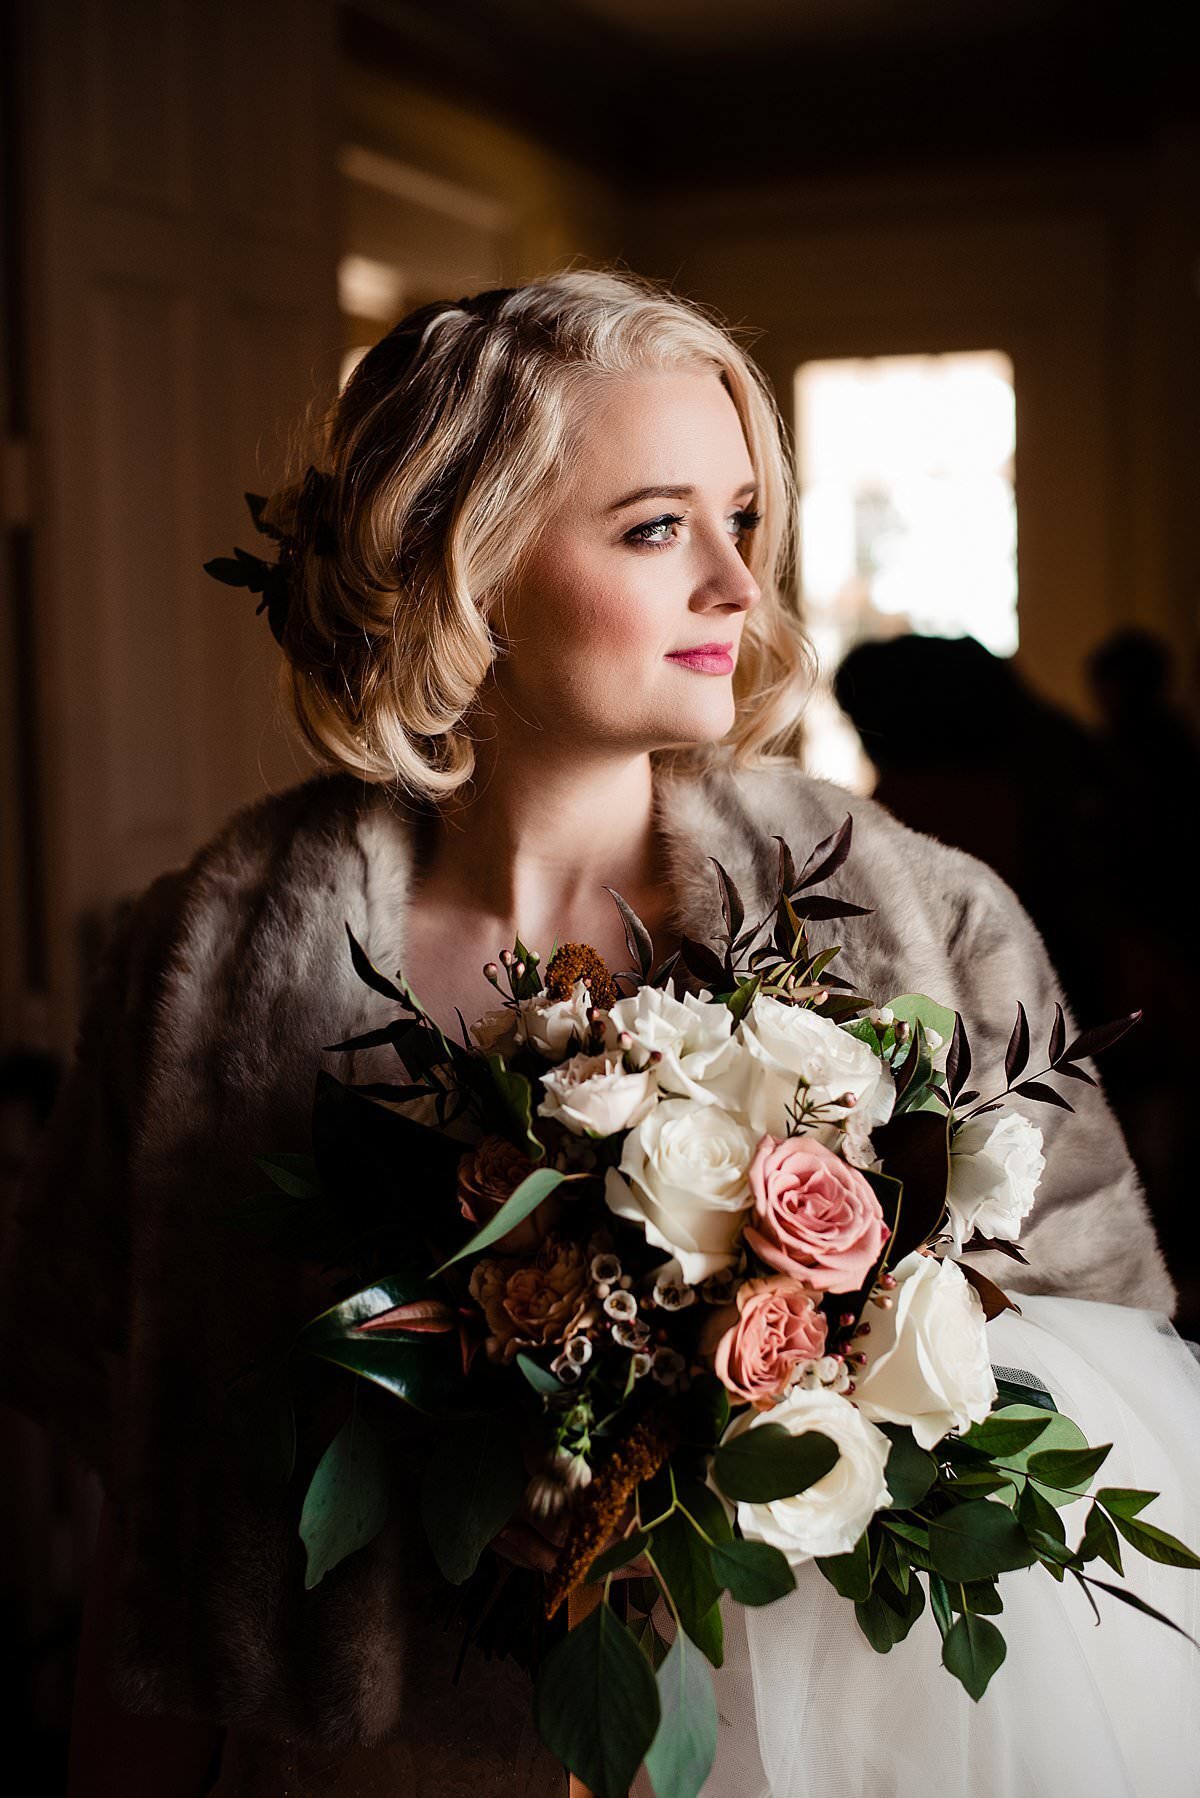 Bride wearing shawl to warm up at winter wedding, holding a rose bouquet